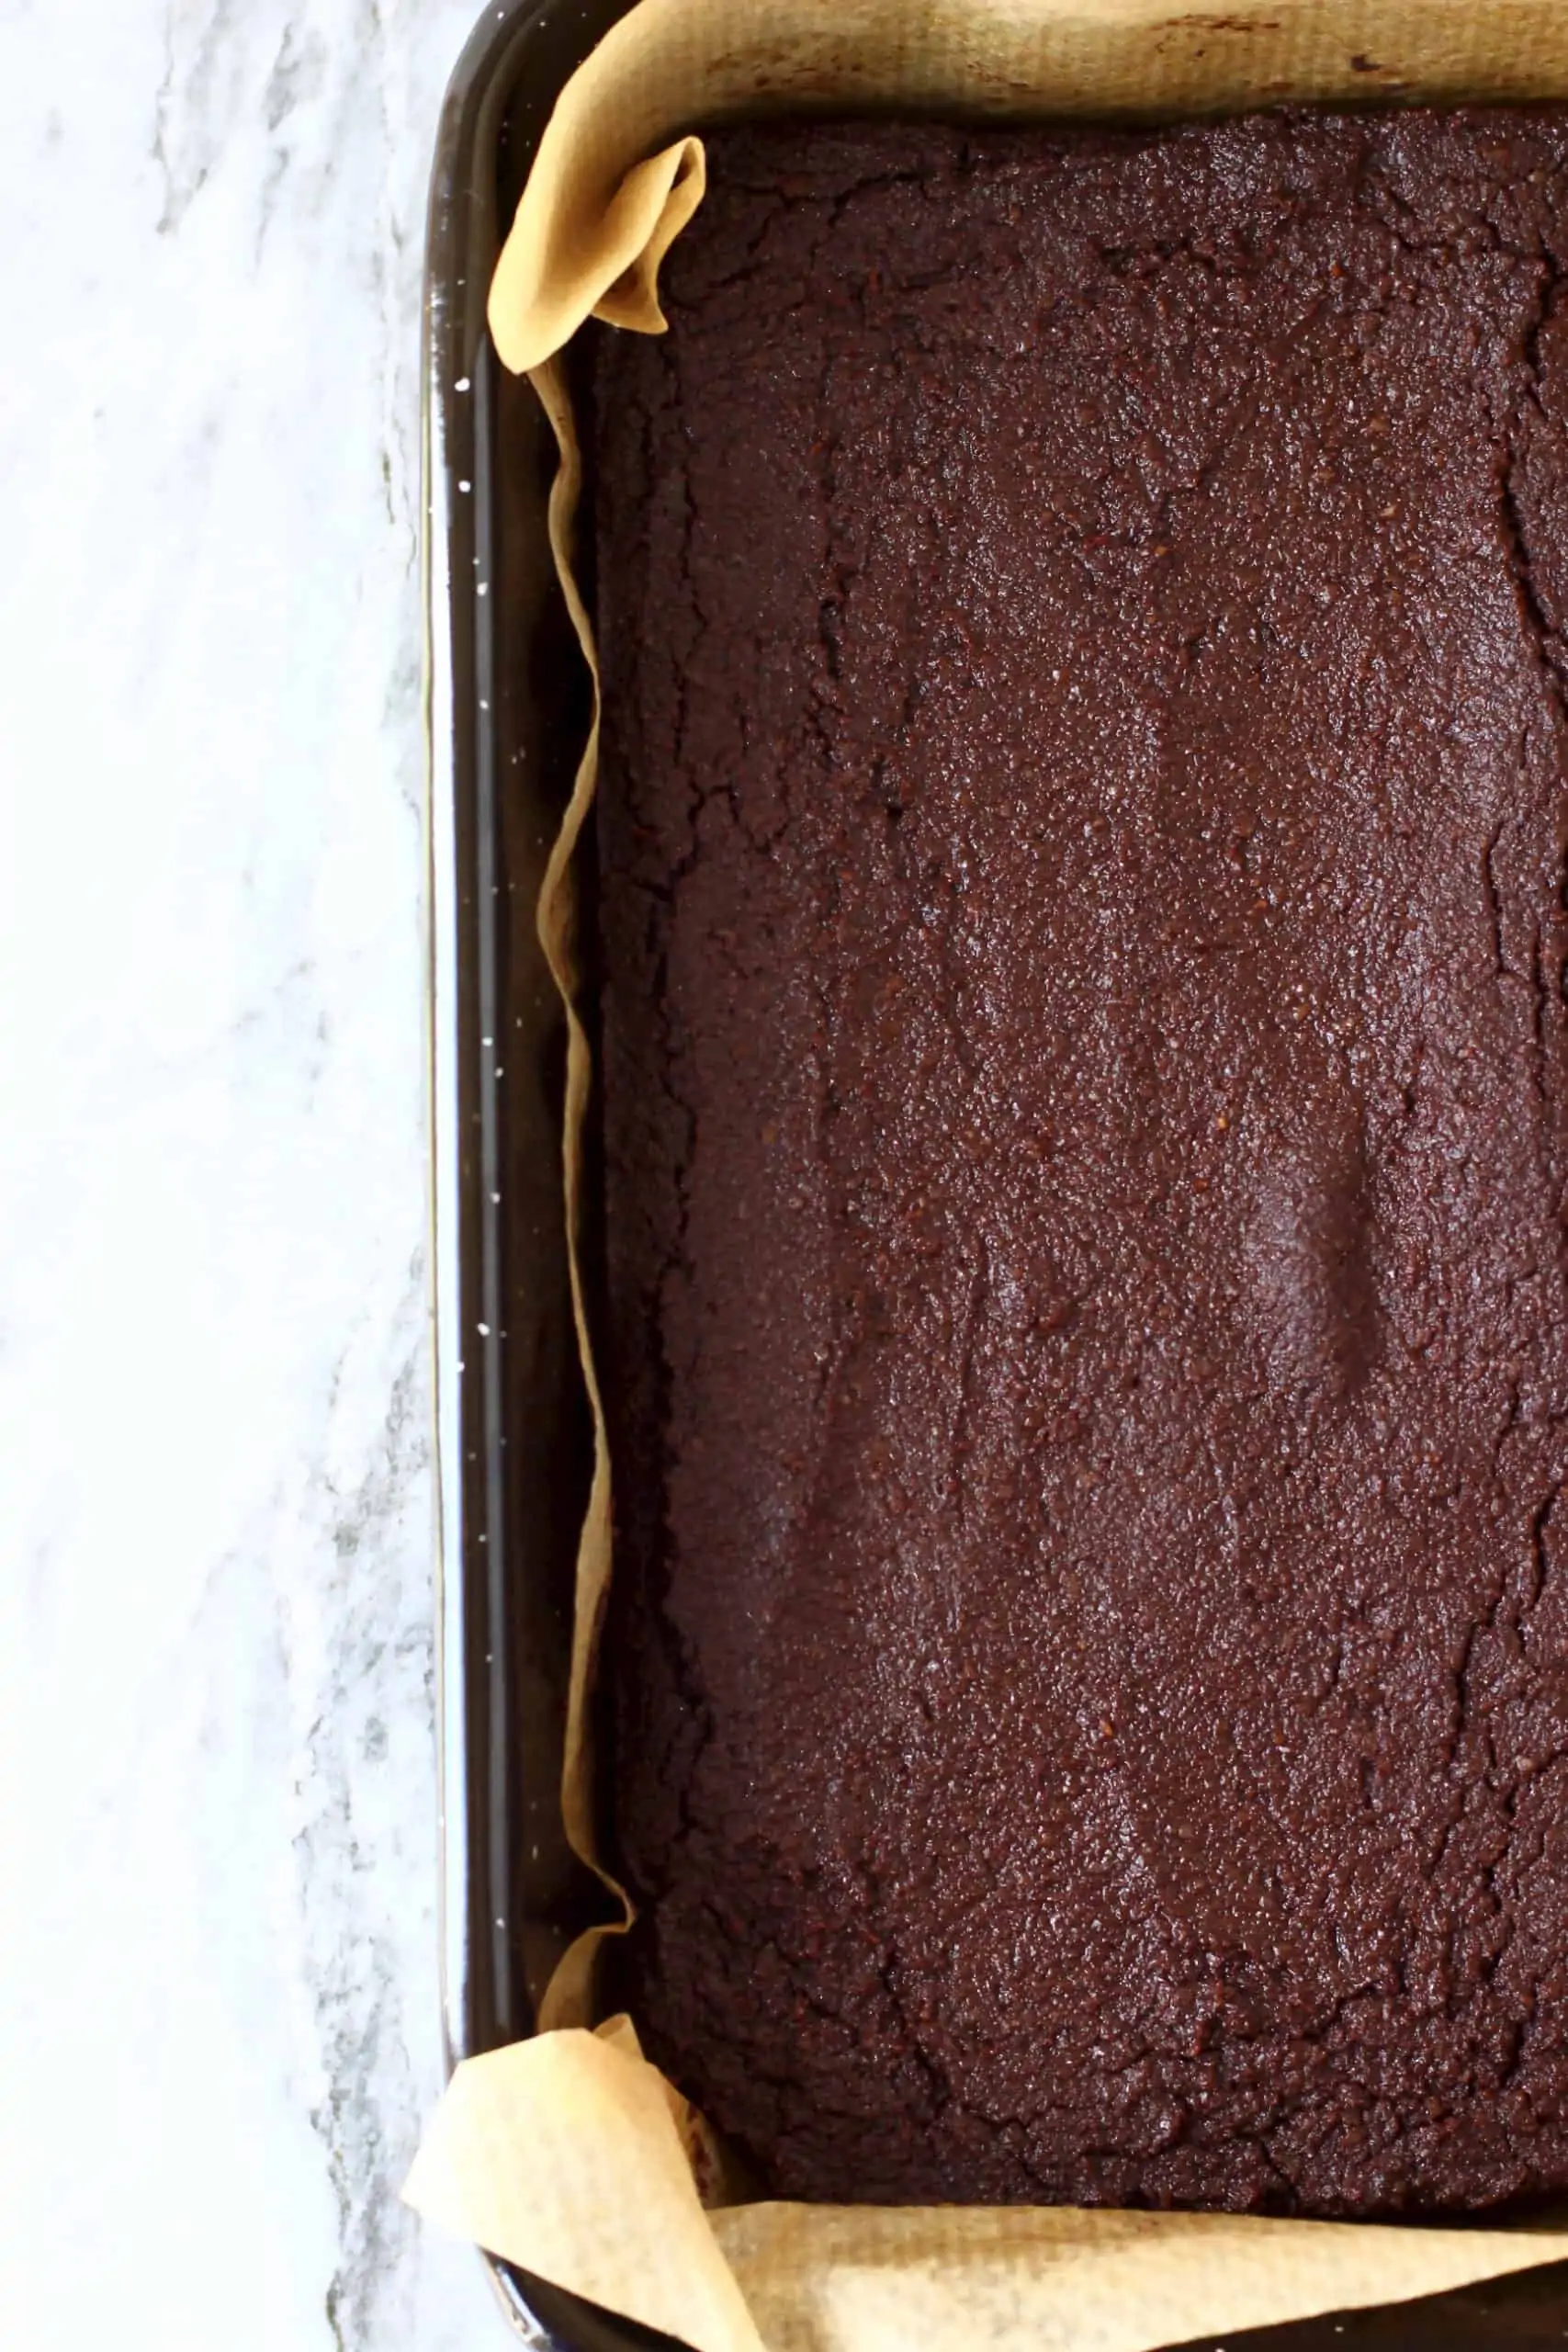 Vegan gluten-free chocolate brownies in a square baking tin lined with baking paper